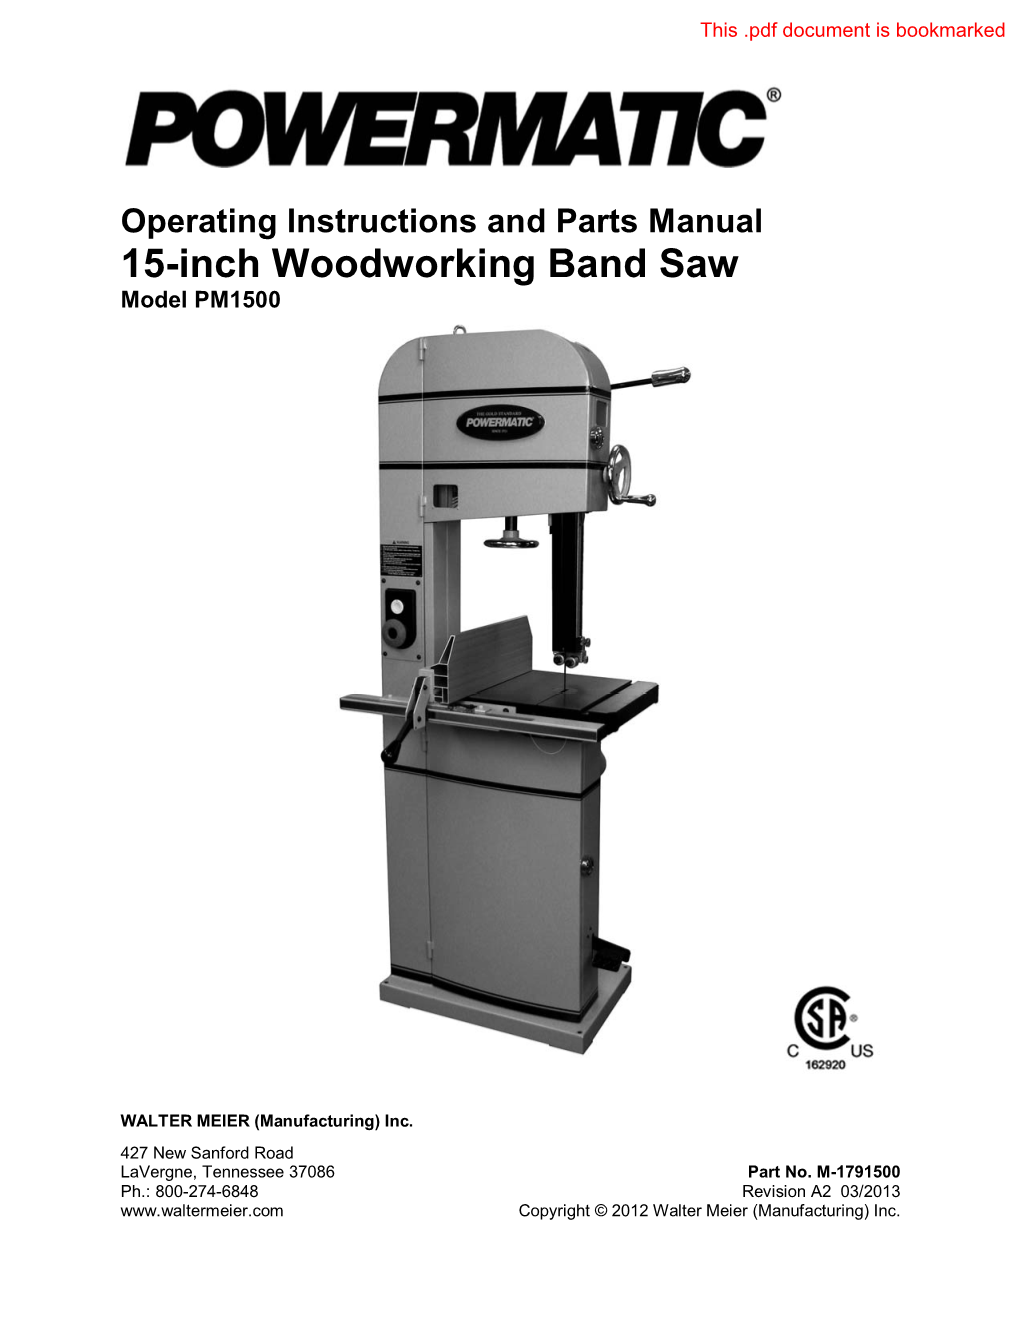 15-Inch Woodworking Band Saw Model PM1500